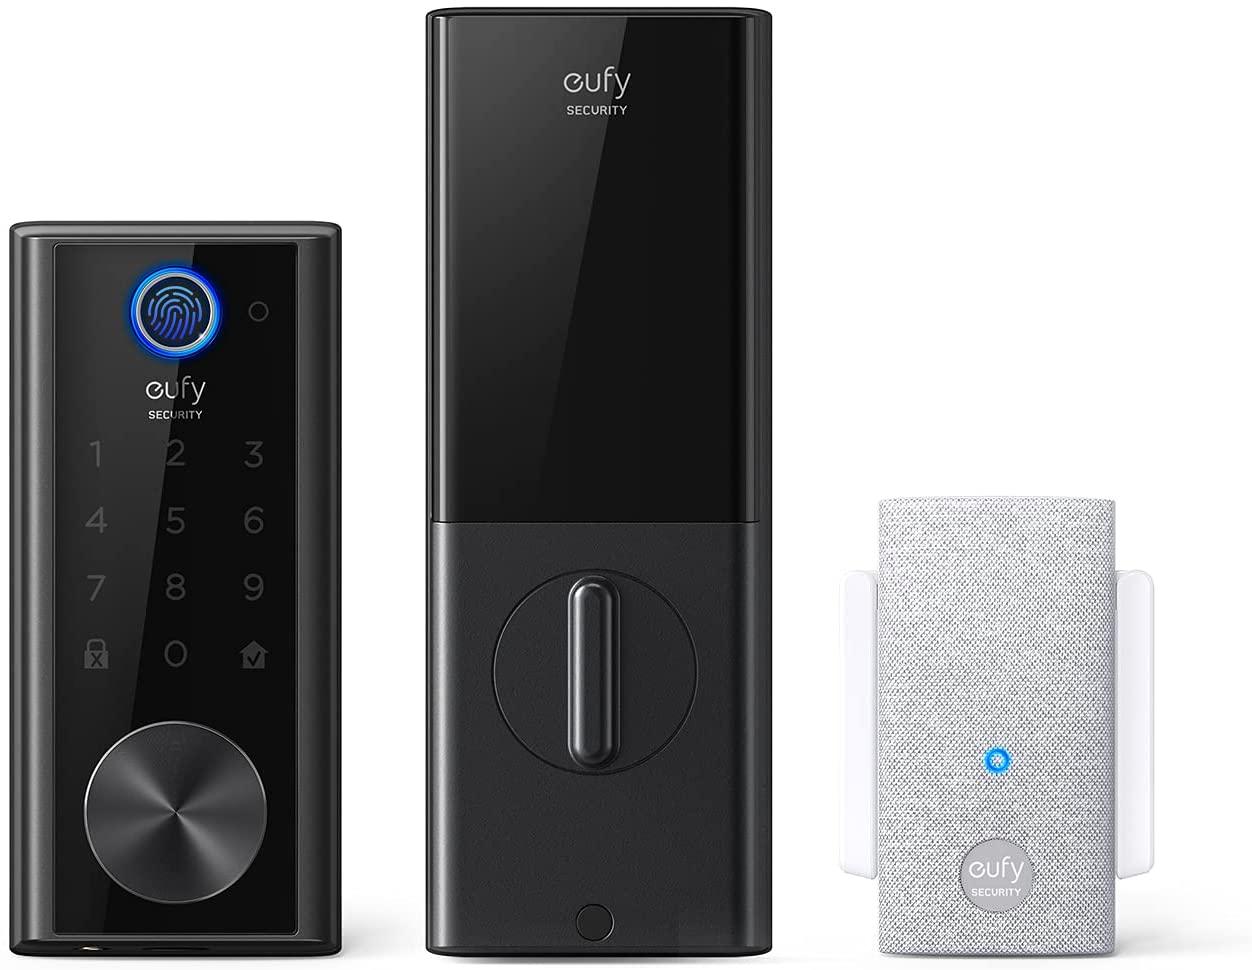 Eufy Security Fingerprint Smart Lock with Wifi for $169.99 Shipped